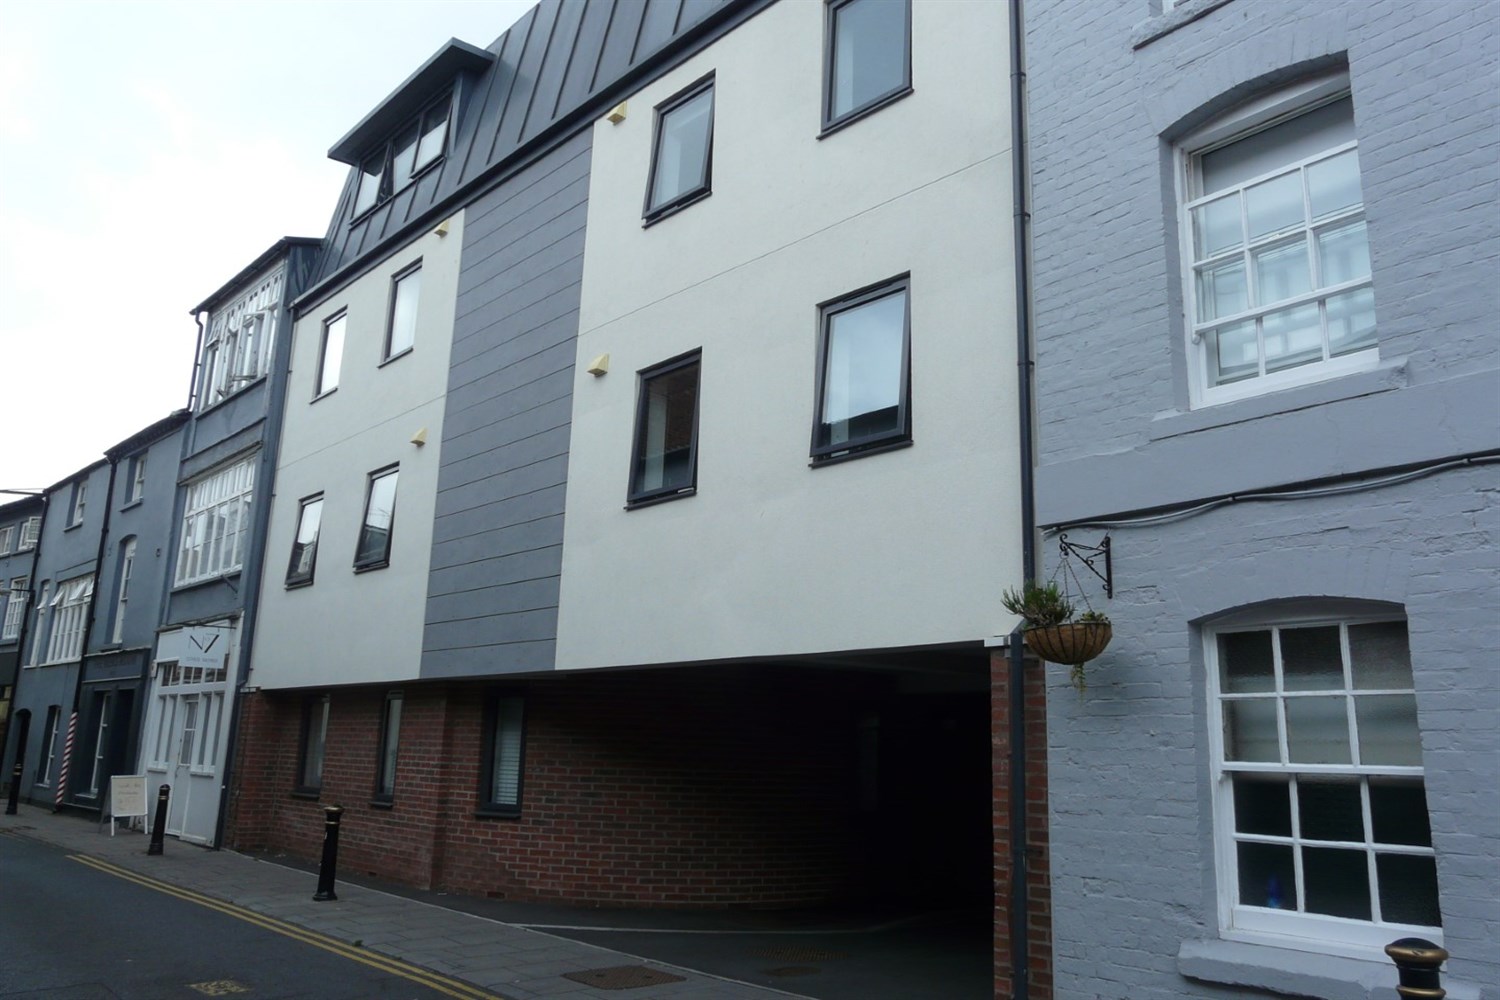 Apartment 5, Alban Court, Hereford